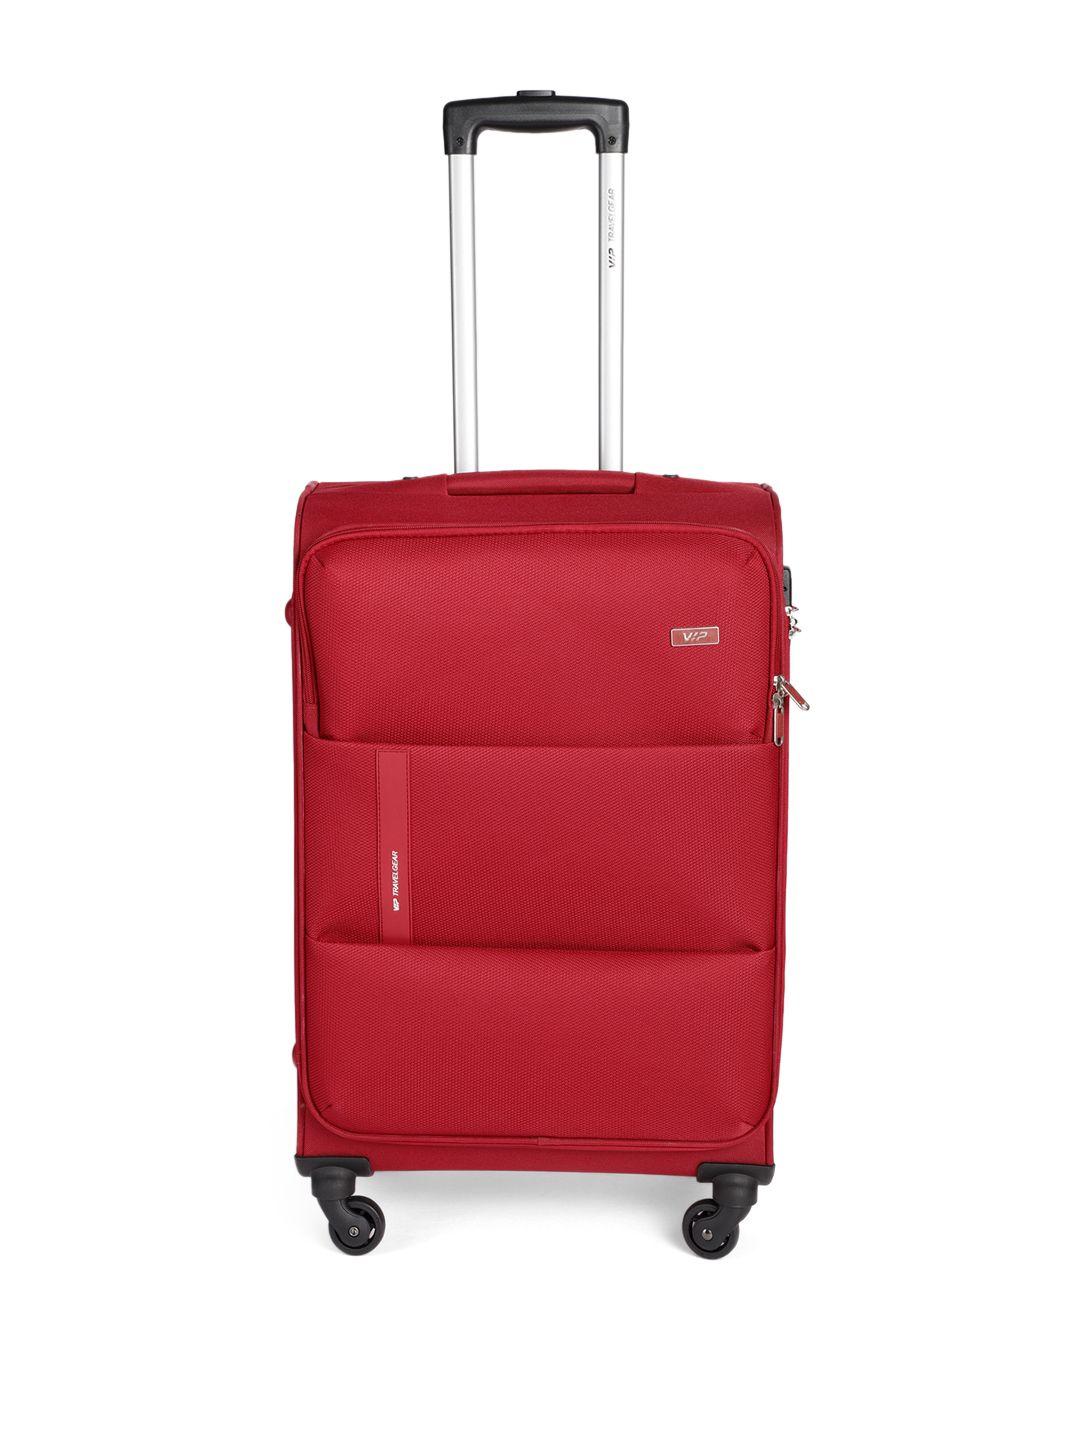 vip-red-solid-medium-360-degree-rotatable-trolley-suitcase